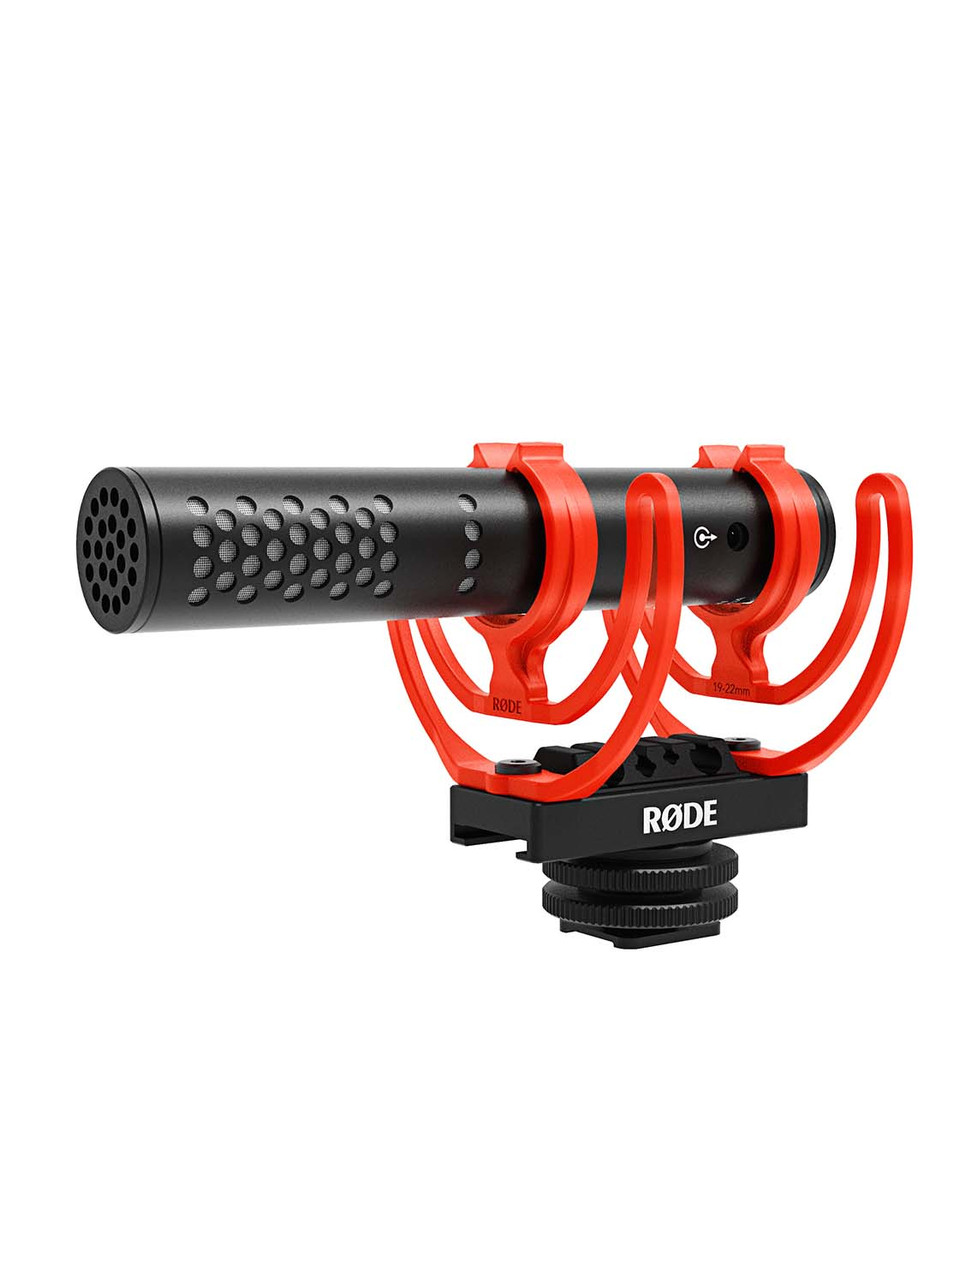 Buy - Rode VideoMicro Compact Microphone Designed for Smaller